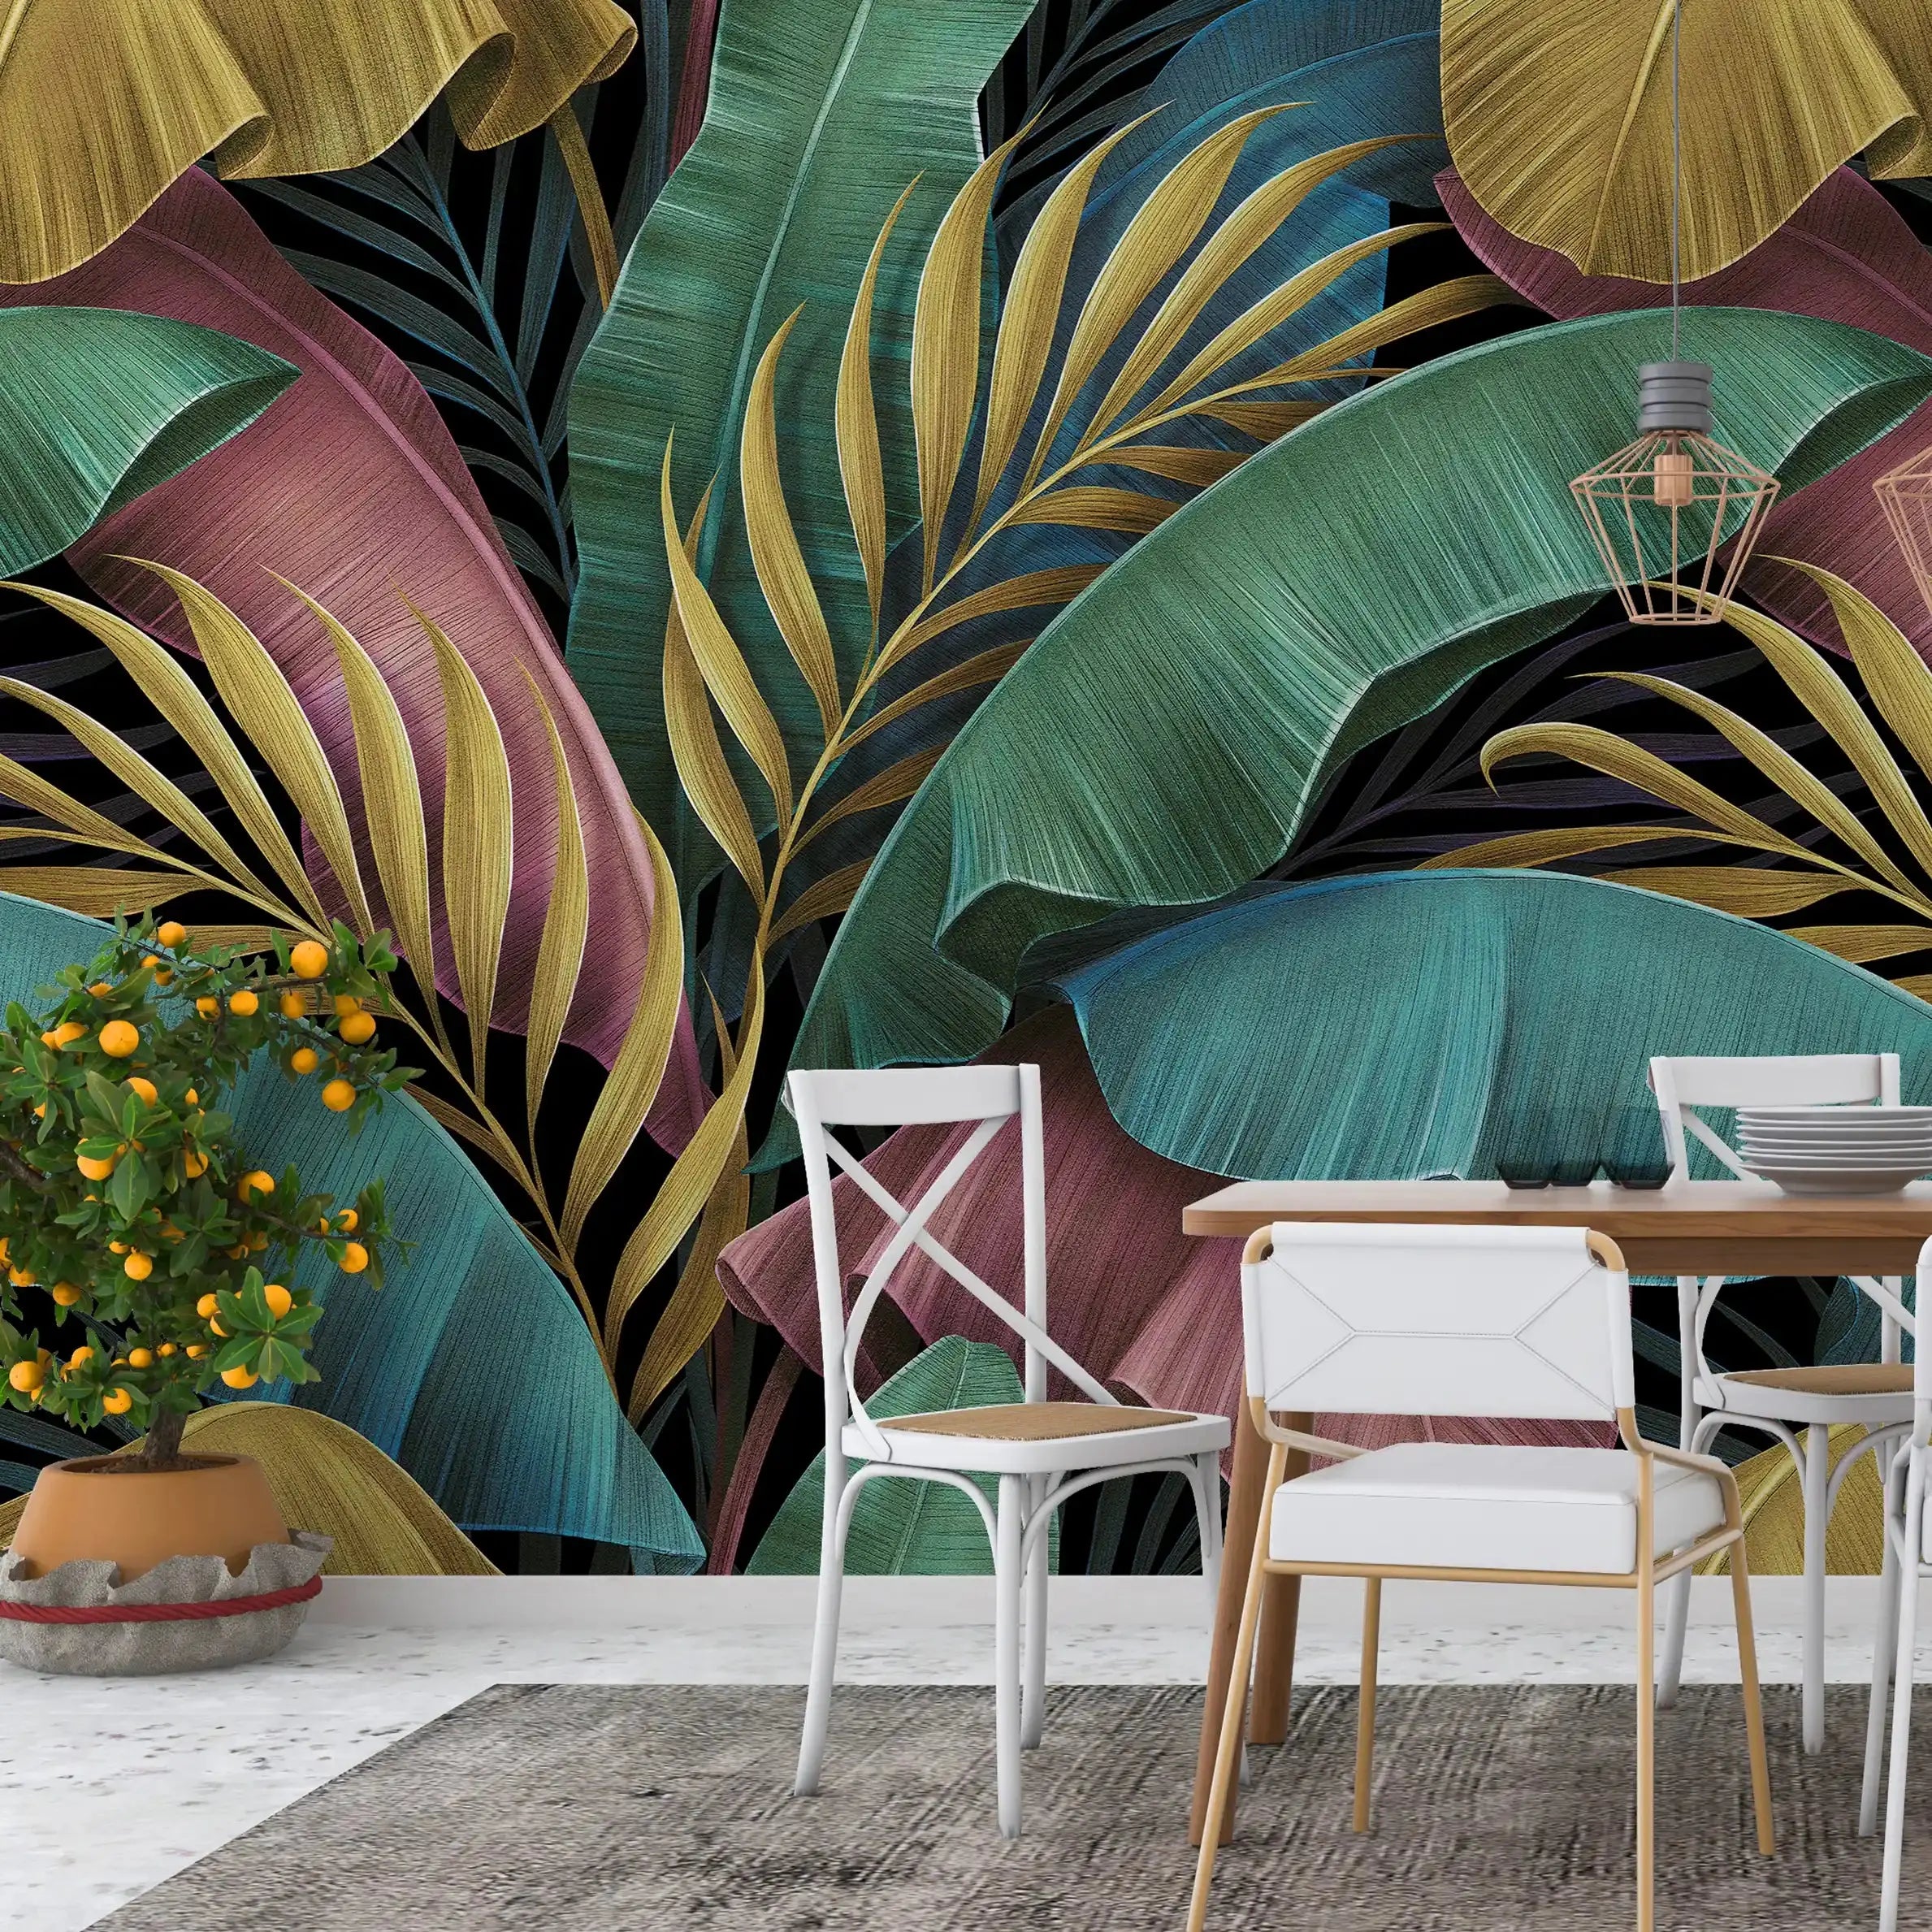 3075-A / Peel and Stick Boho Wallpaper: Tropical Palm Leave Design, Perfect for Accent Wall Decor - Artevella